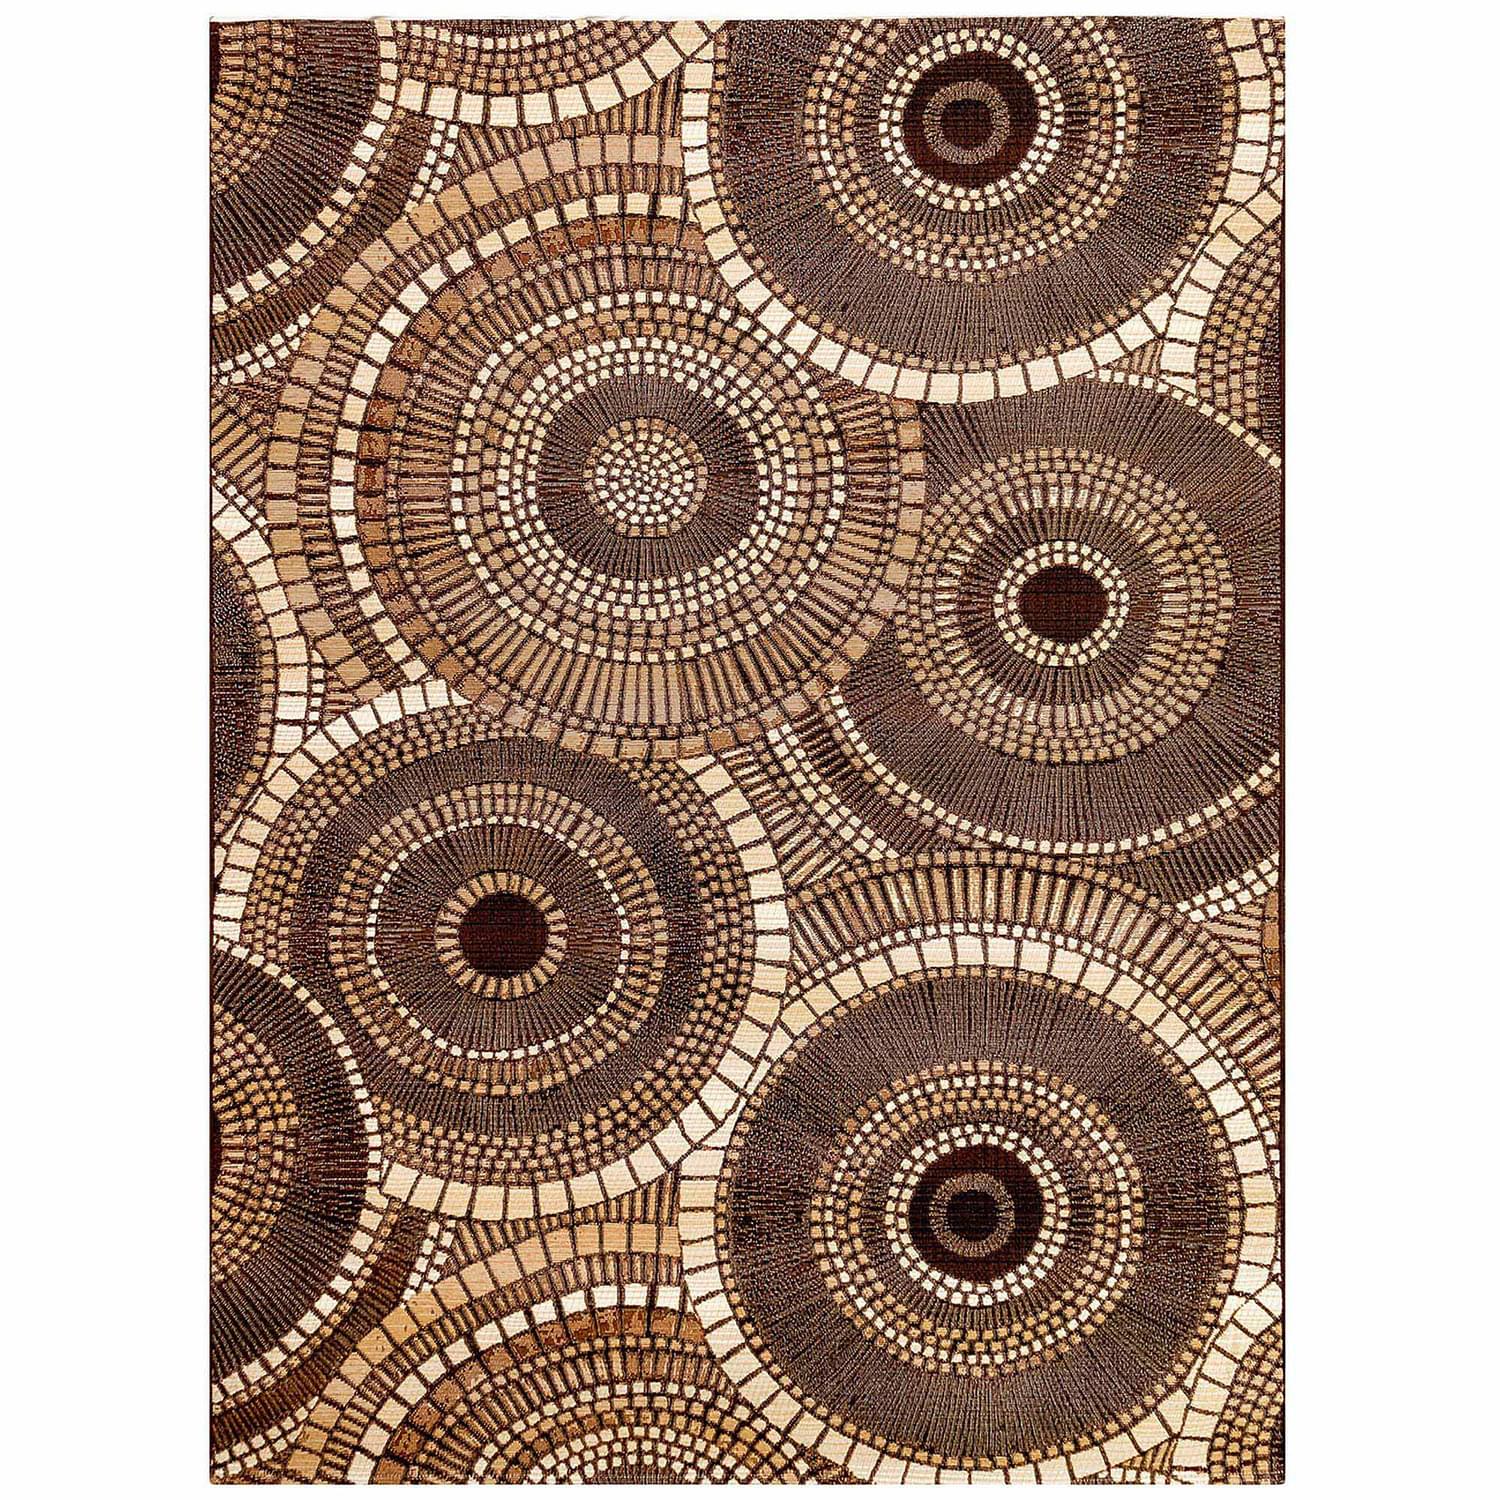 Liora Manne Marina Low Profile  Durable Indoor/Outdoor Woven Rug- Circles Brown  Product Image